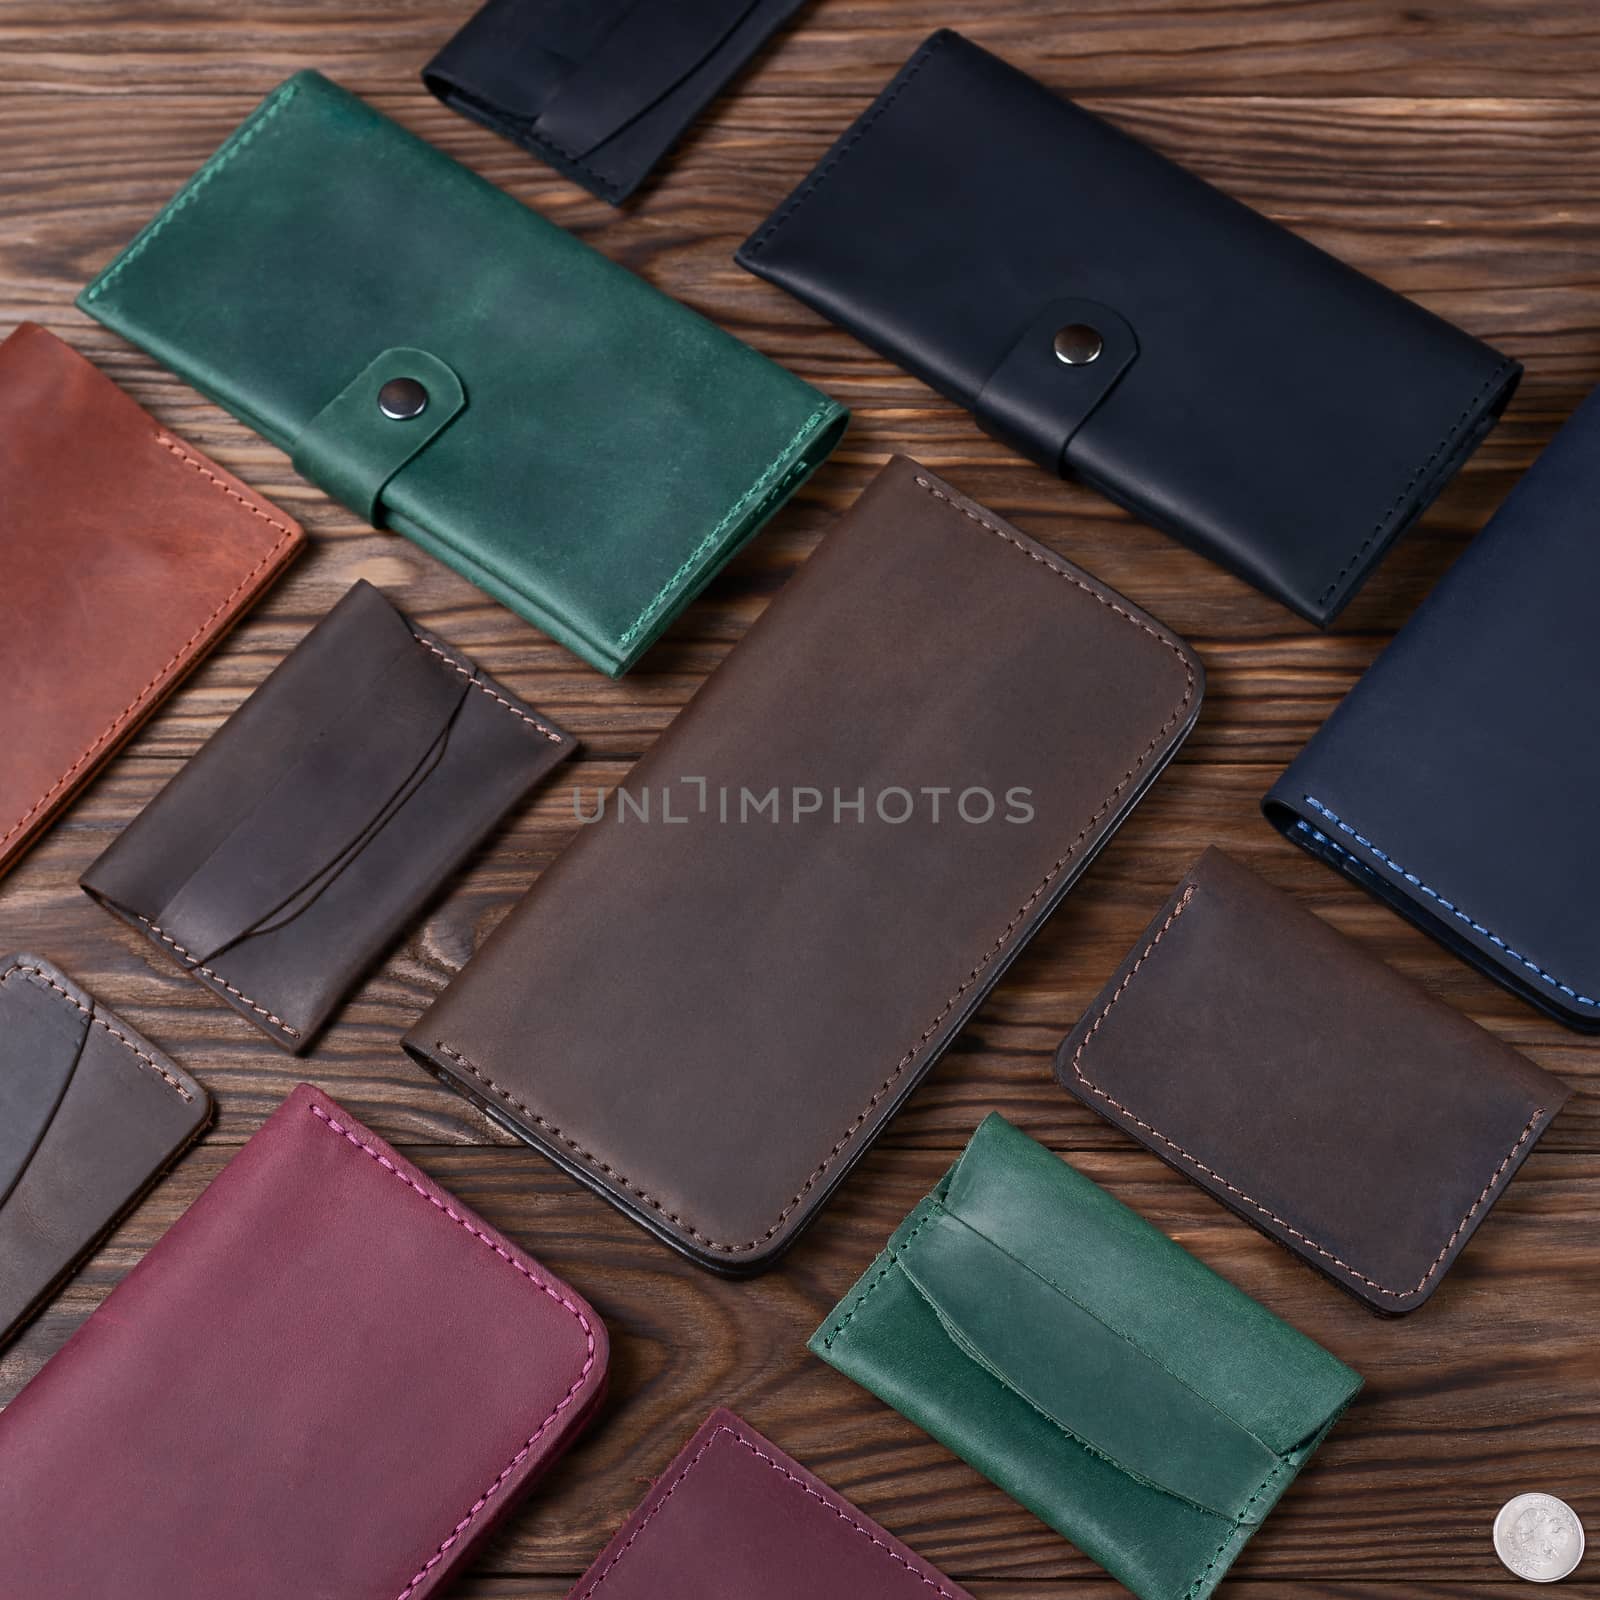 Brown color handmade leather porte-monnaie surrounded by other leather accessories on wooden textured background.  Side view. Stock photo of luxury accessories.